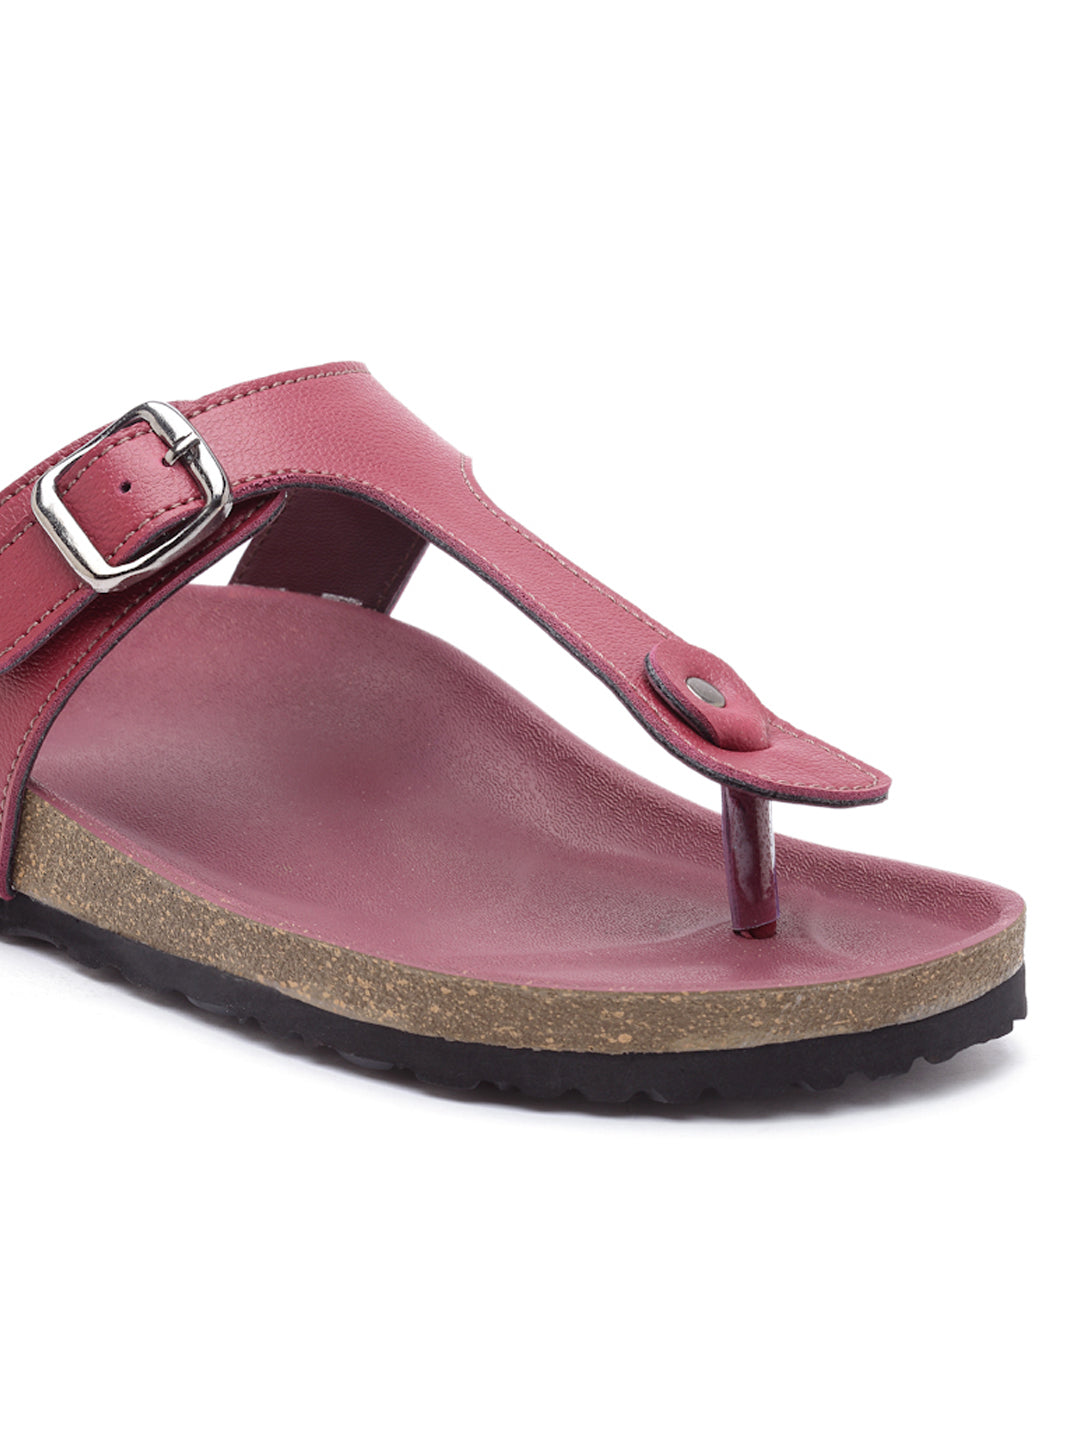 Women's Outdoor Stylish Maroon Synthetic Leather Casual Sandal